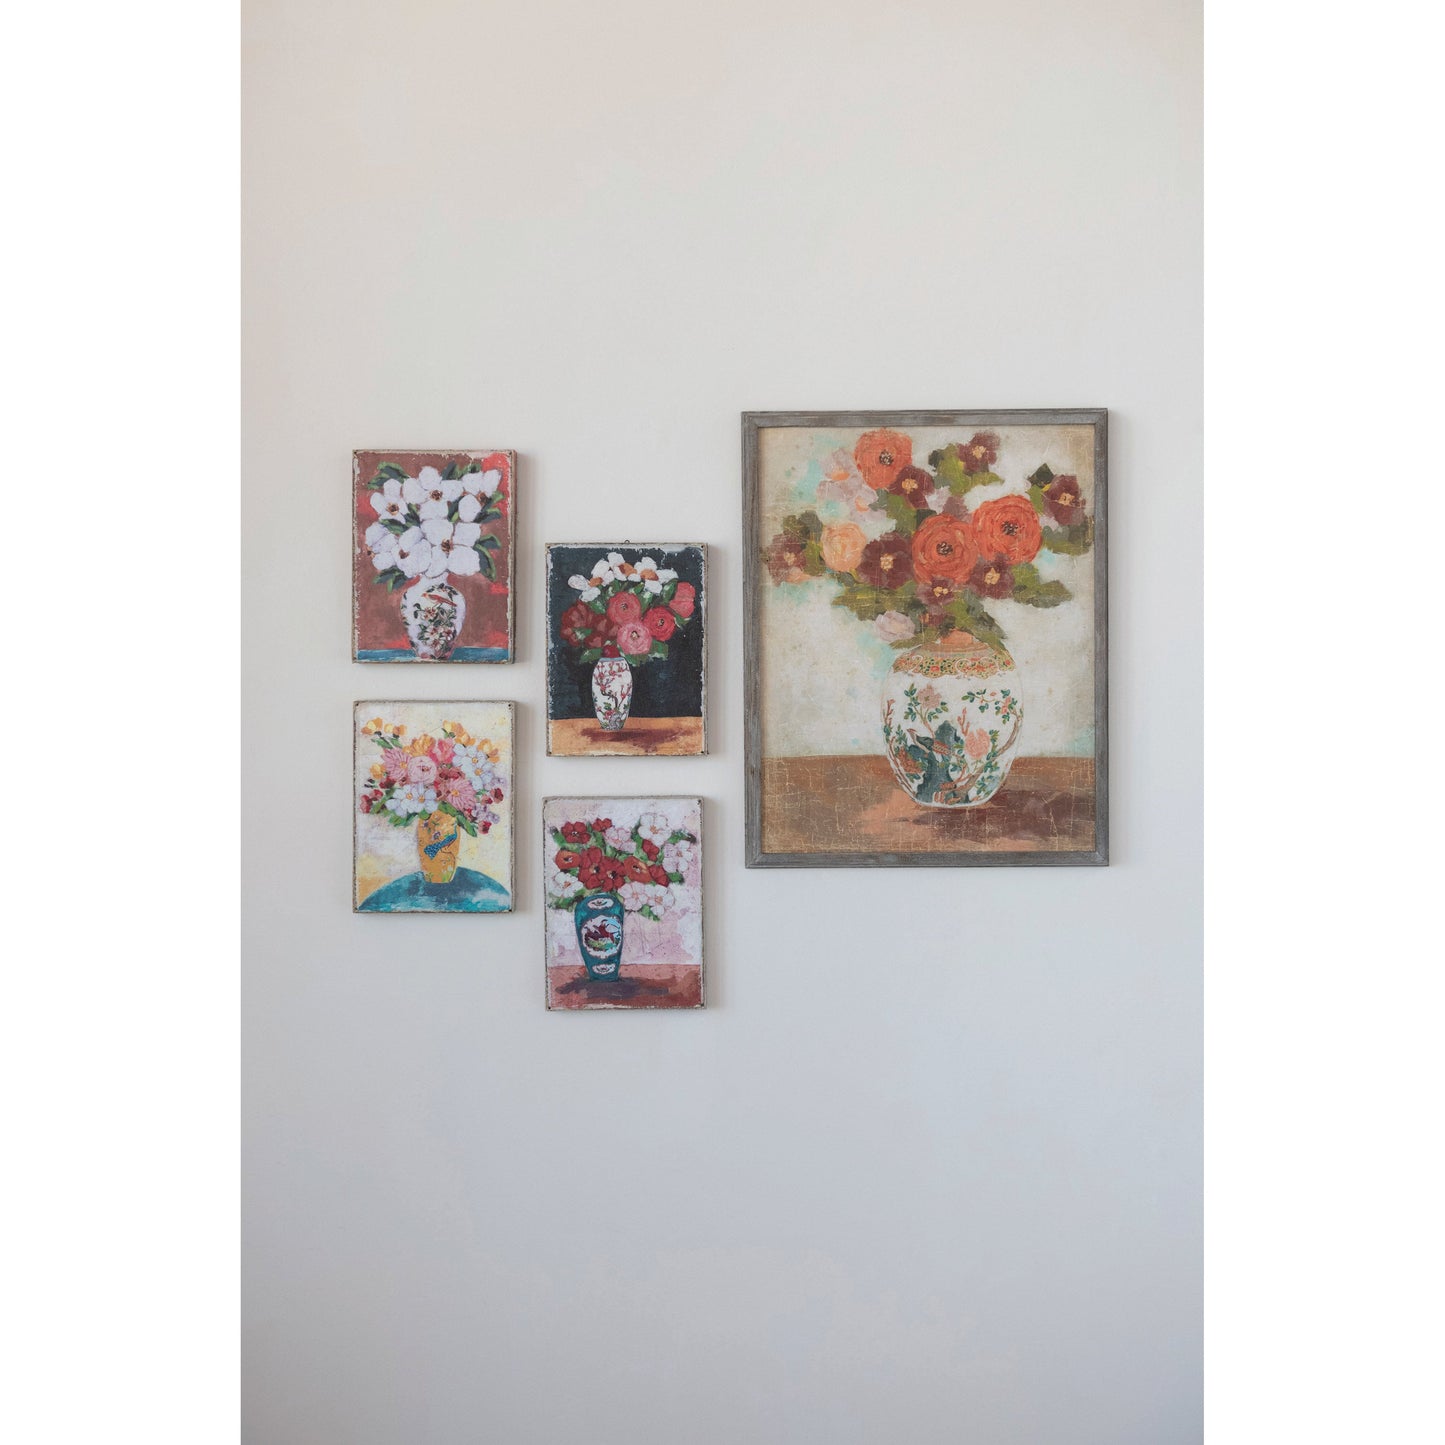 Canvas Wall Décor with Flowers in Vase